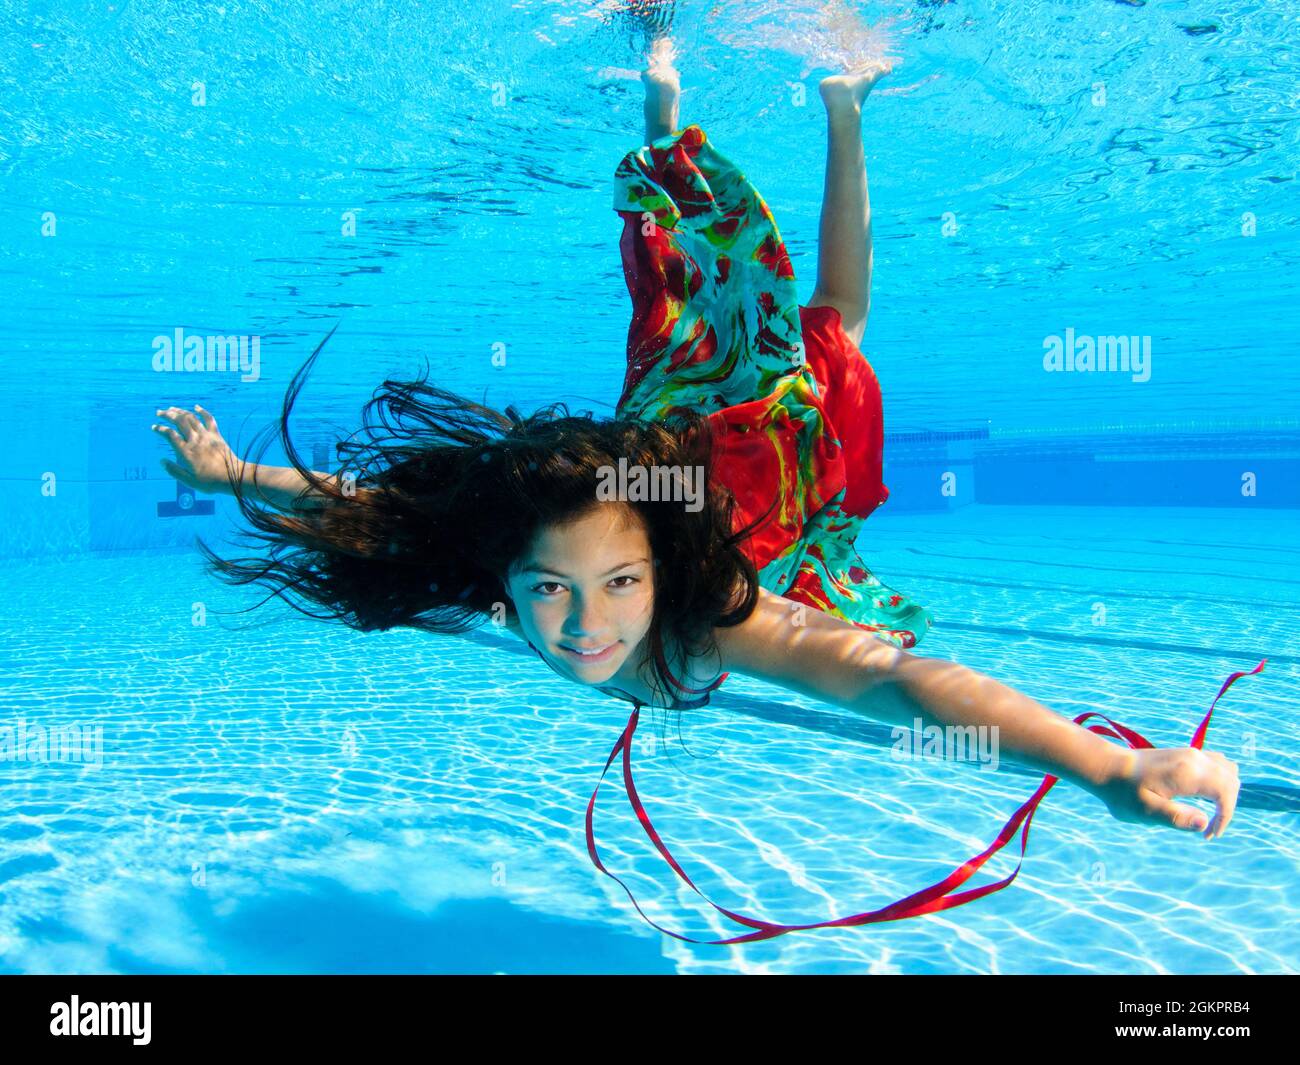 A 12 year old female teen dressed in colourful dress free diving underwater in a swimming pool. Model release available Stock Photo